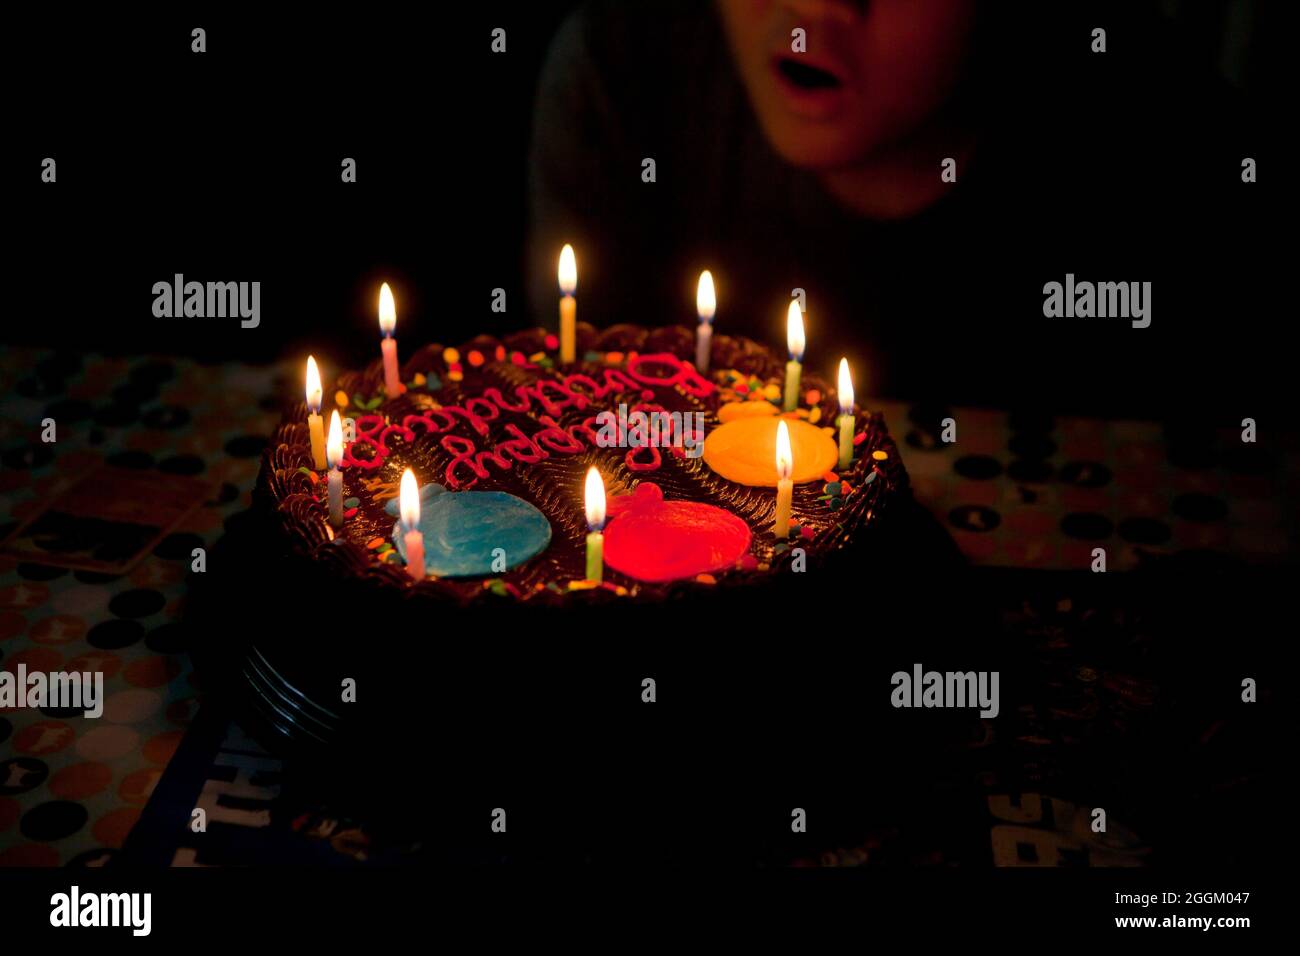 Boy blowing out candles on chocolate birthday cake - USA Stock Photo